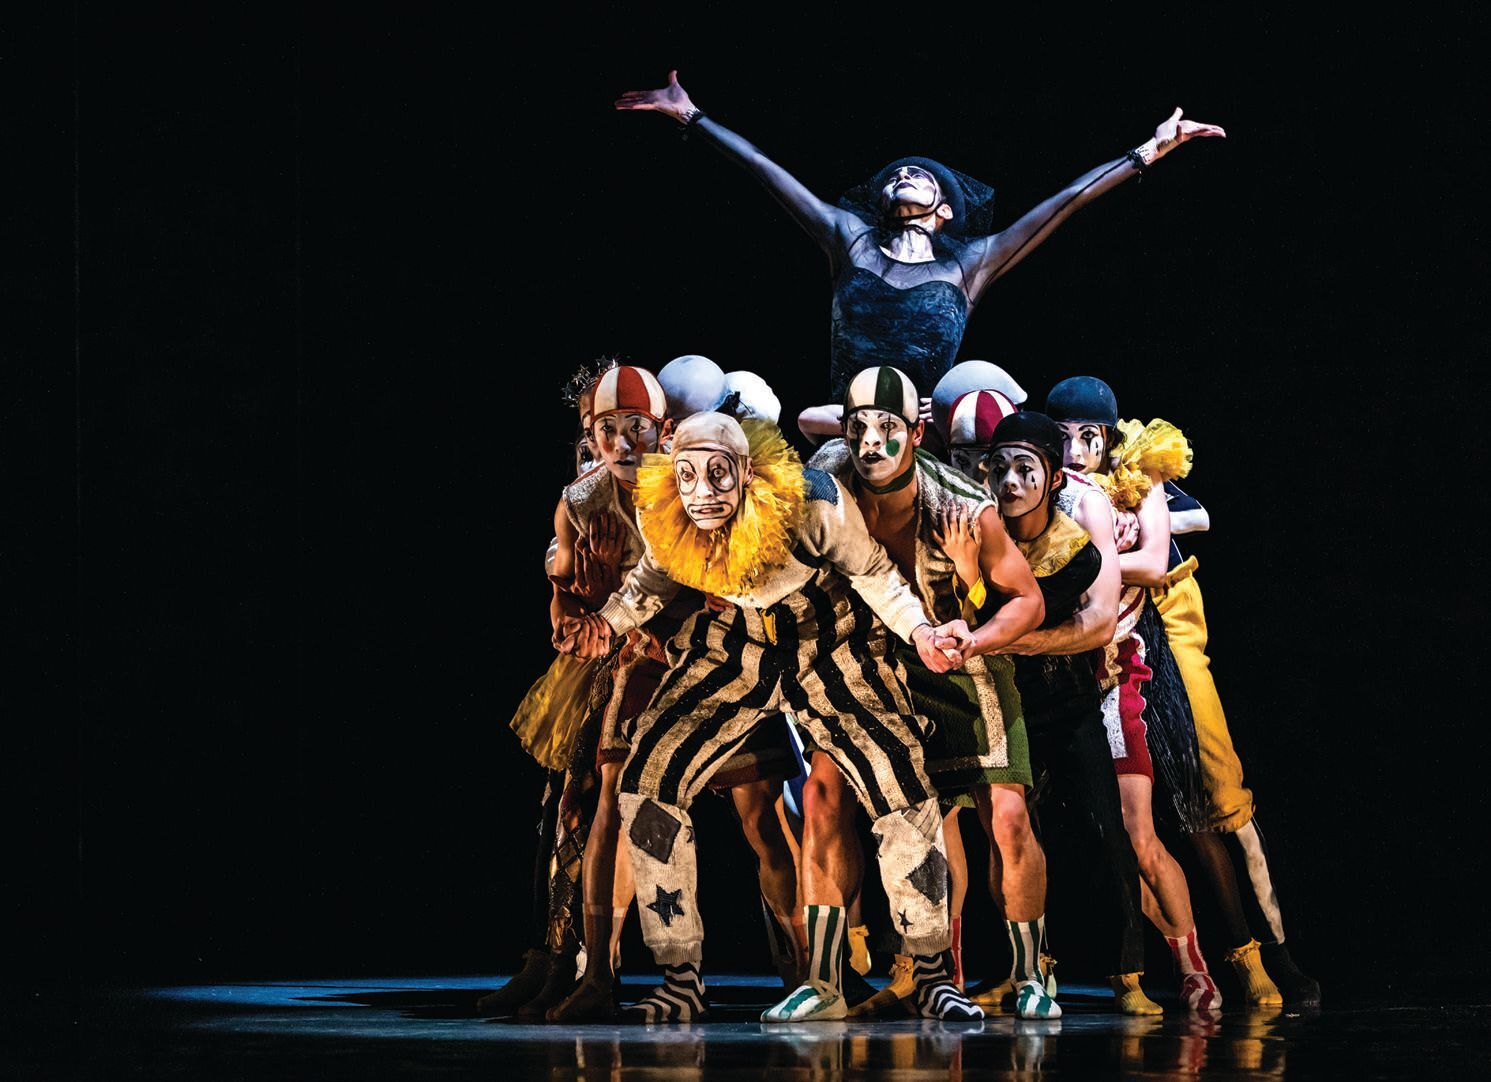 Danielle Rowe’s choreography shines in MADCAP. PHOTO: BY LINDSAY THOMAS